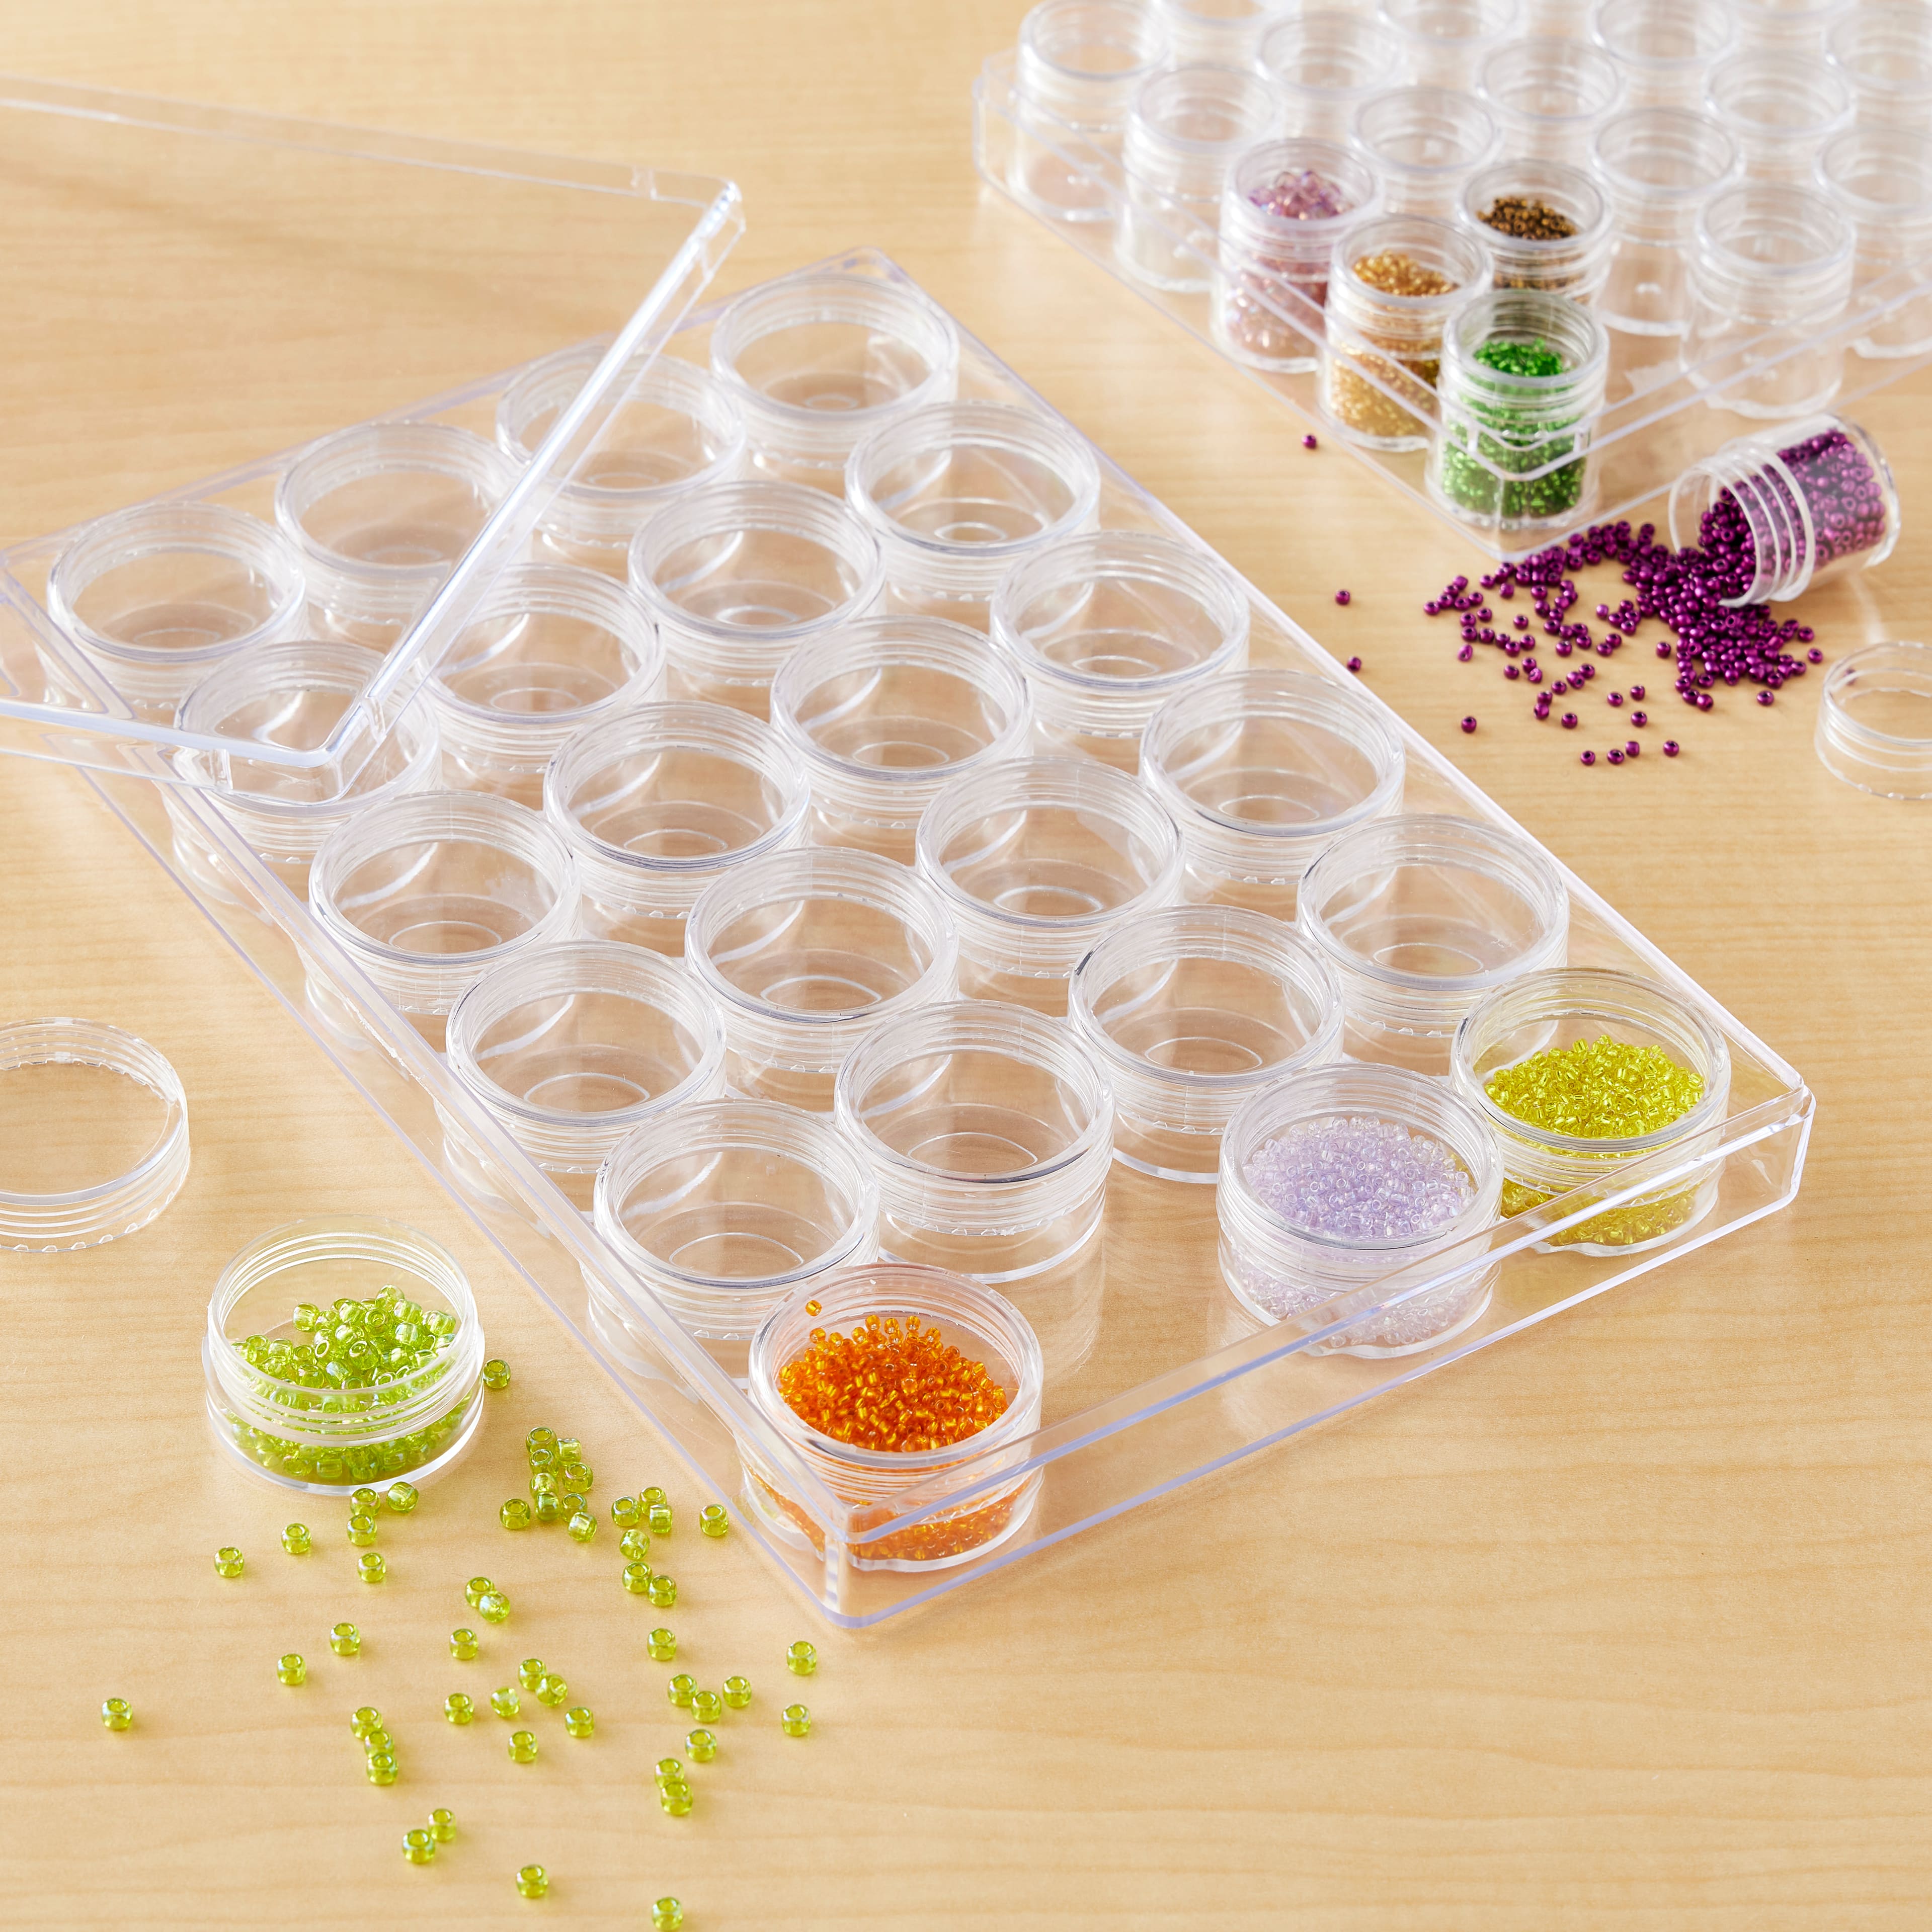 24Pc Small Bead Organizer Plastic Storage Organizer Craft Containers with  2Pc Hinged Lid Craft Cases